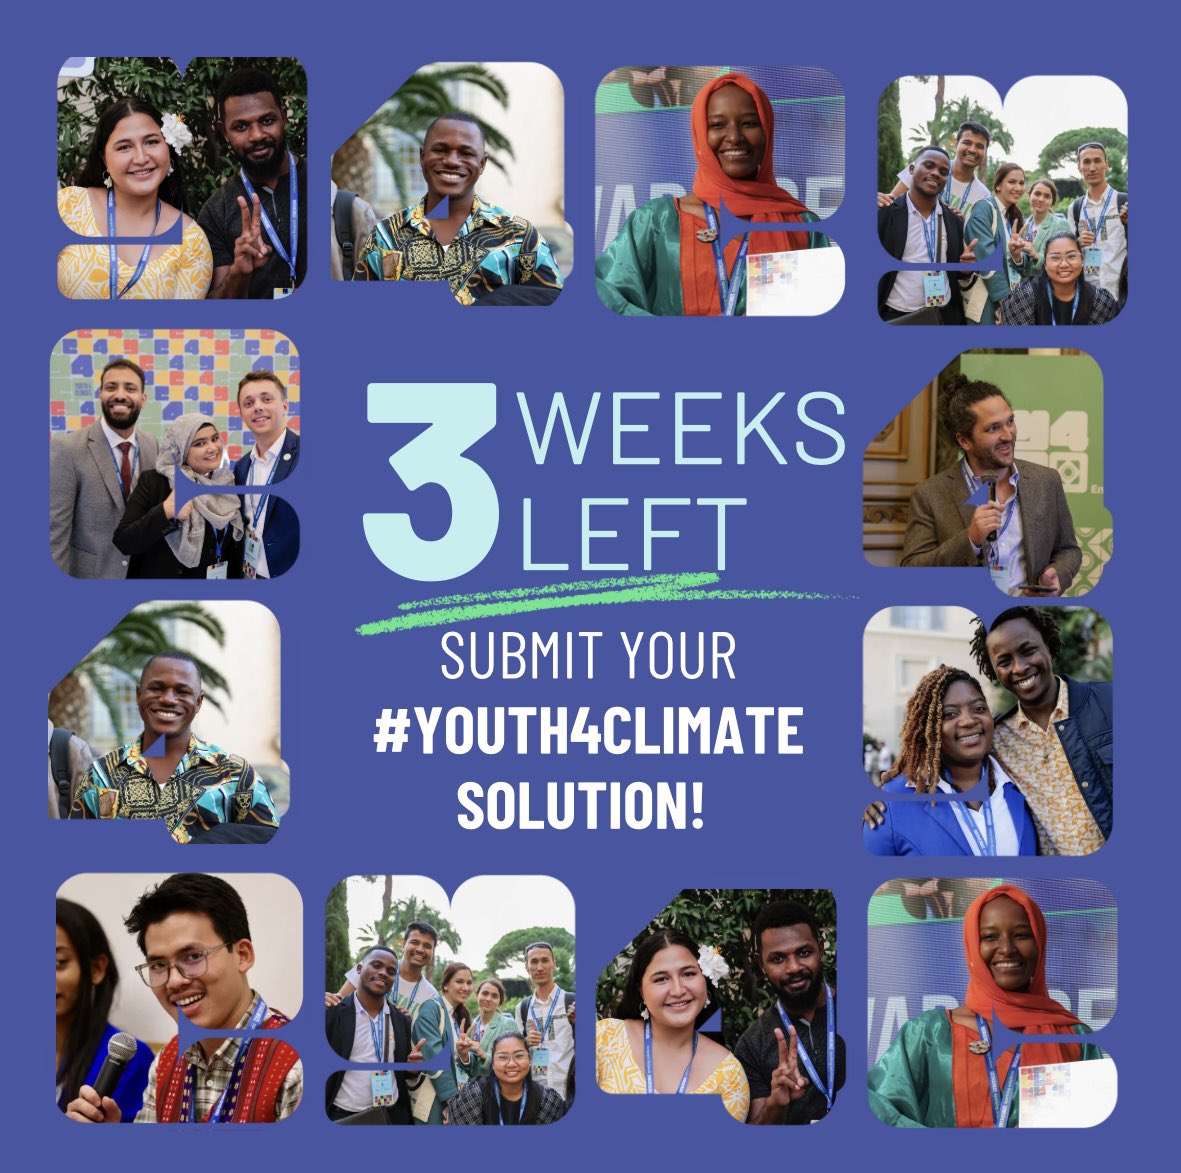 Calling all YOUth! 🌍 Time is ticking! ⏳ Have you shared your #Youth4Climate solution?! Less than 3 weeks left to make your voice heard! 🙌🏾 Get involved now: community.youth4climate.info/callforsolutio…